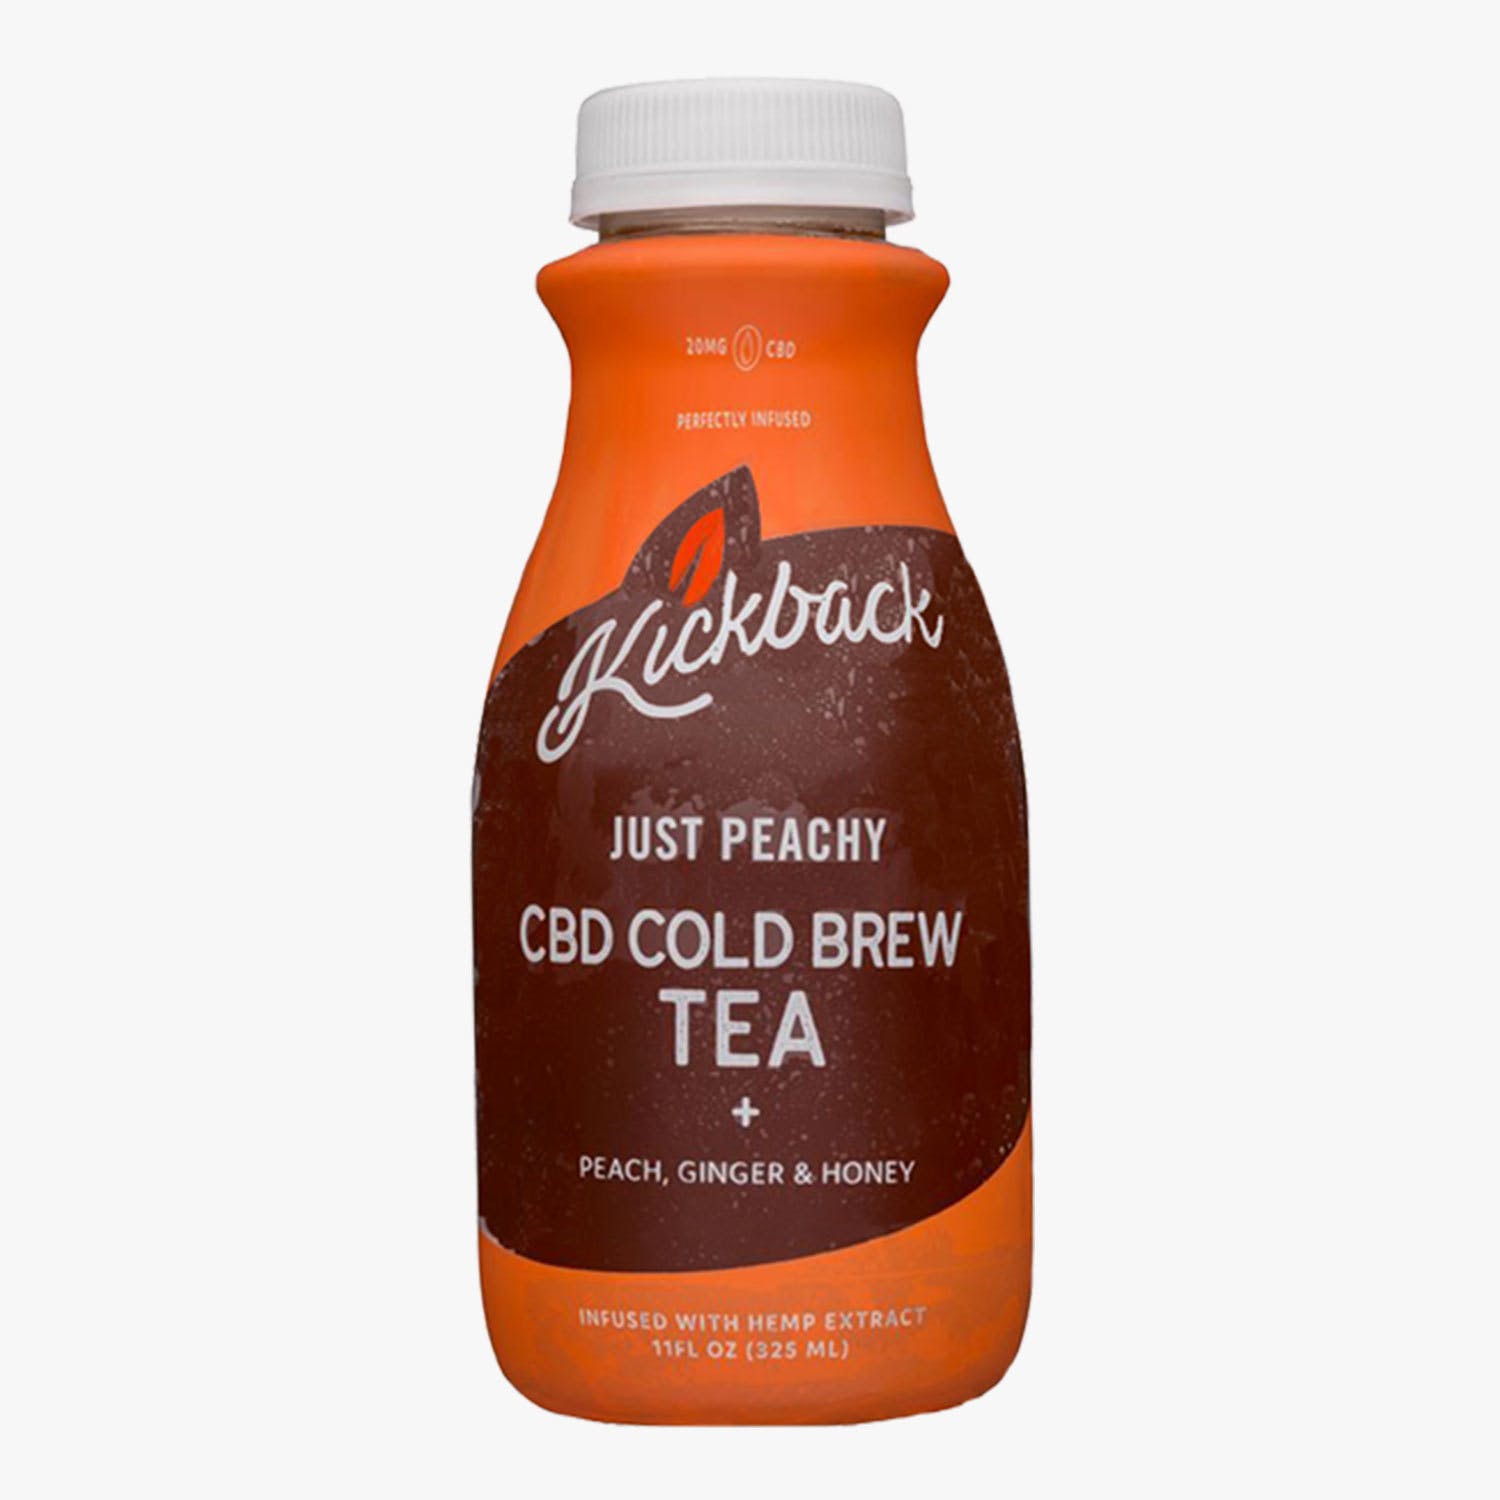 Just Peachy Cold Brew